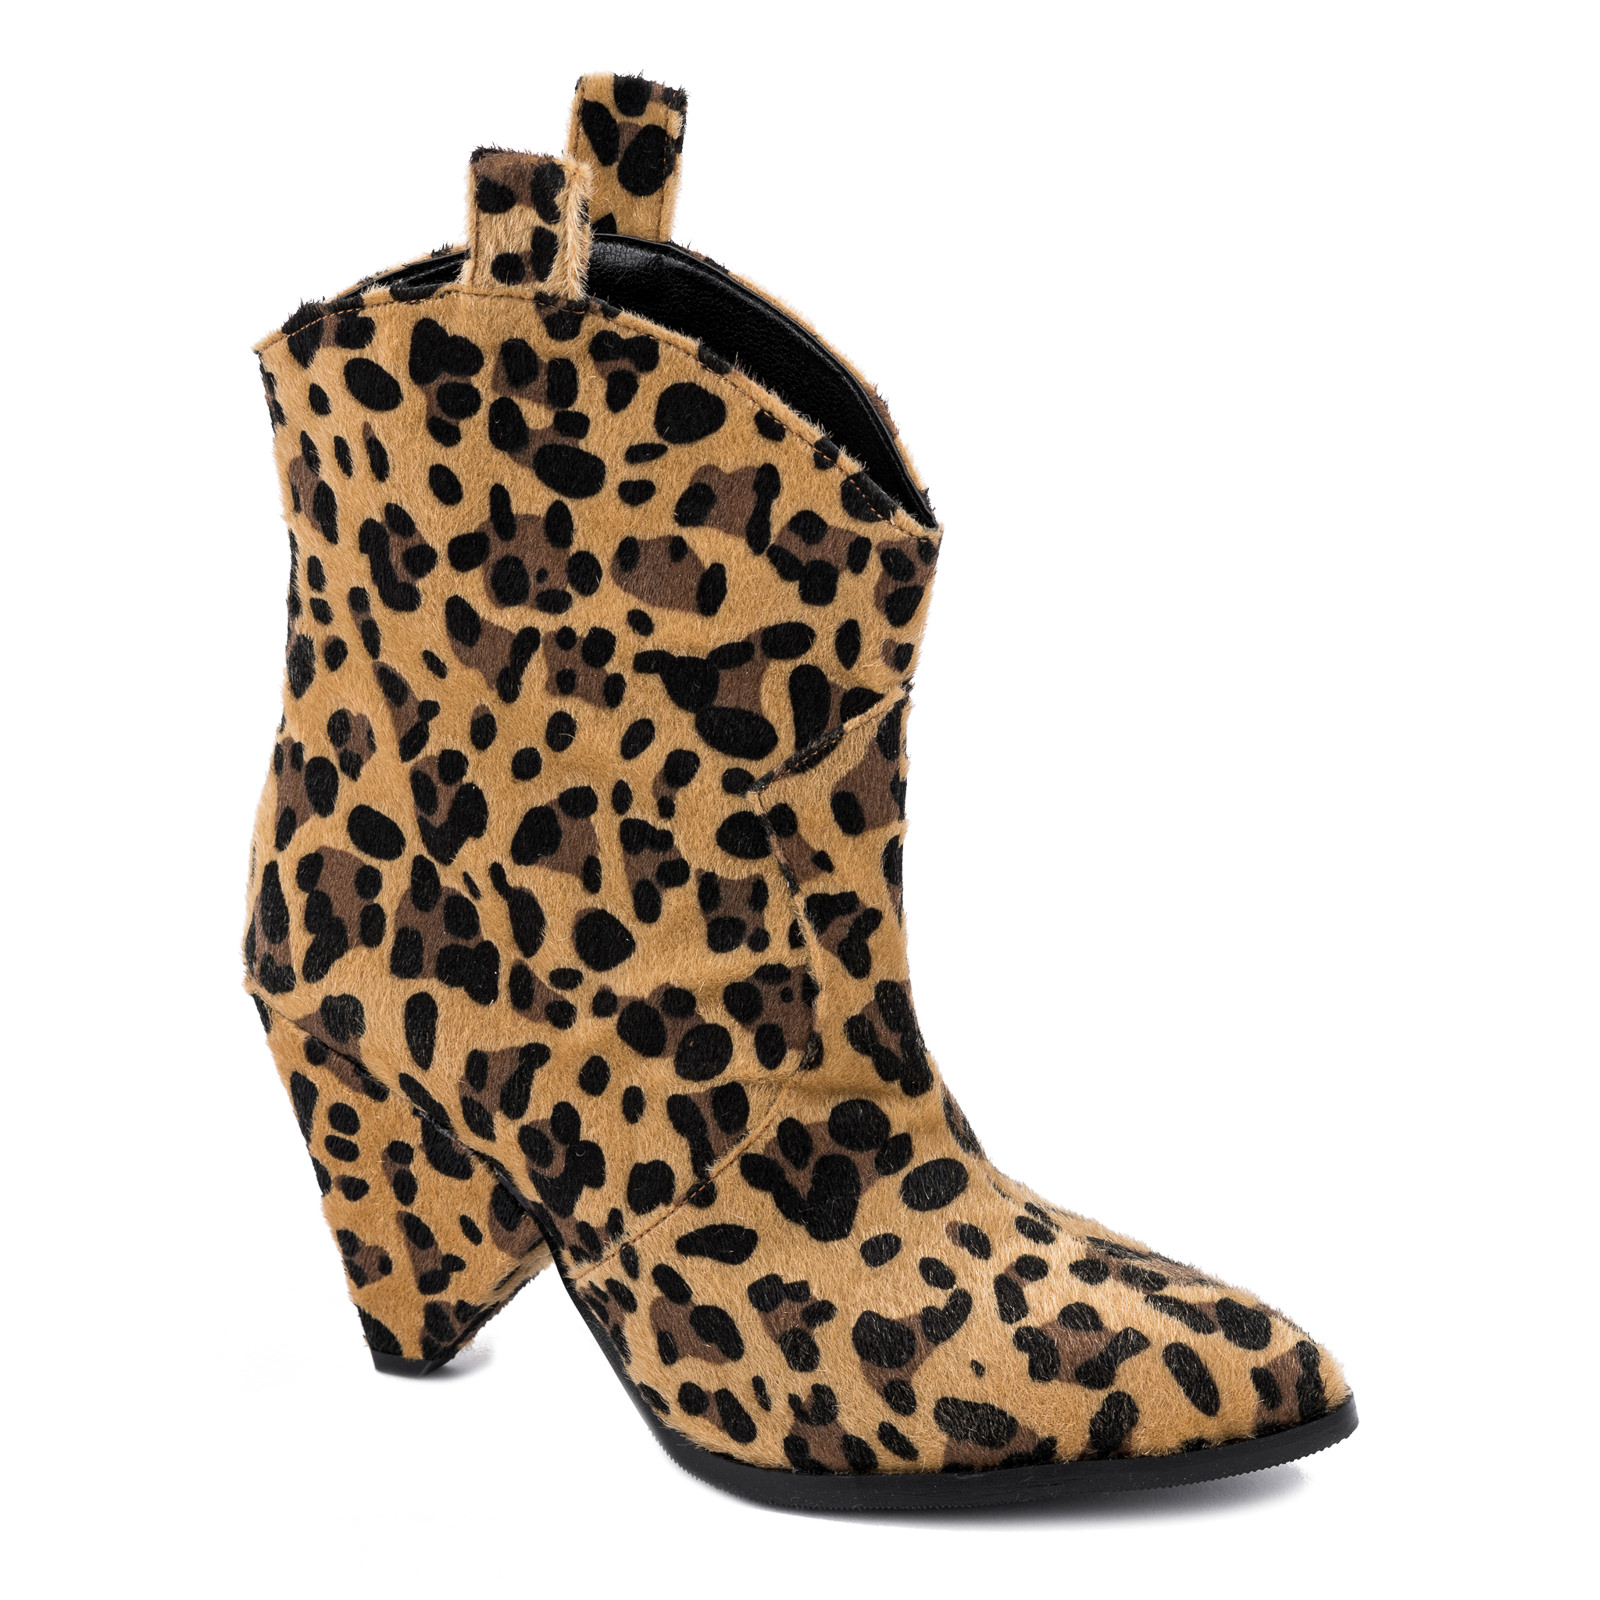 LEOPARD ANKLE BOOTS WITH BLOCK HEEL 